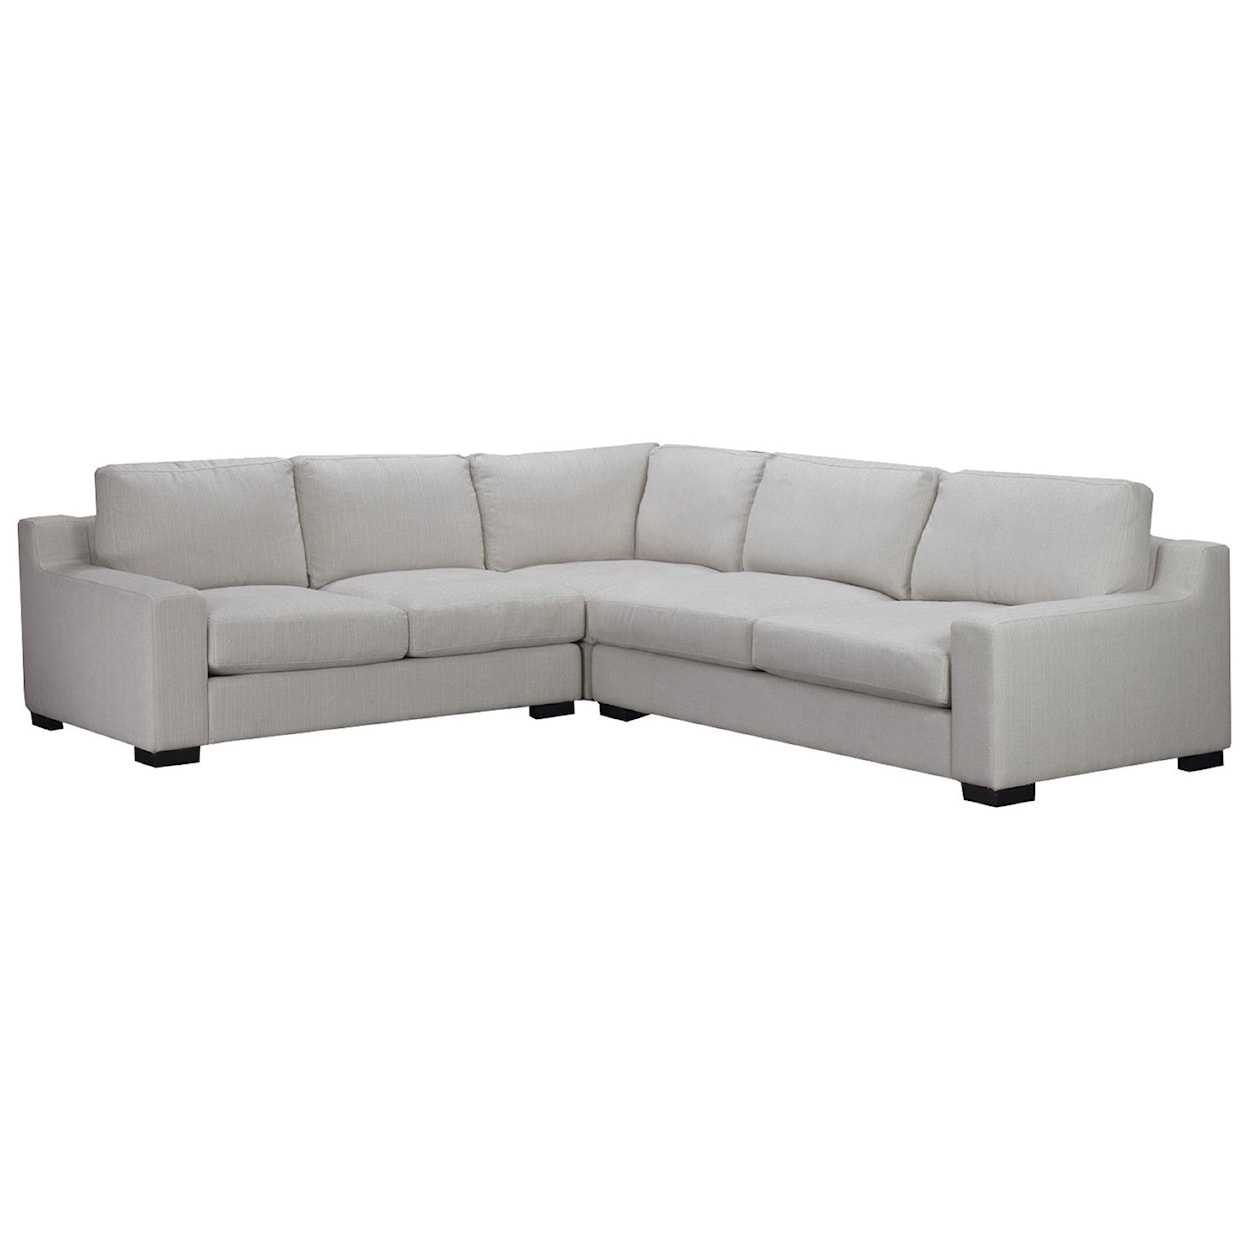 Brentwood Classics Athena 3 Piece Sectional